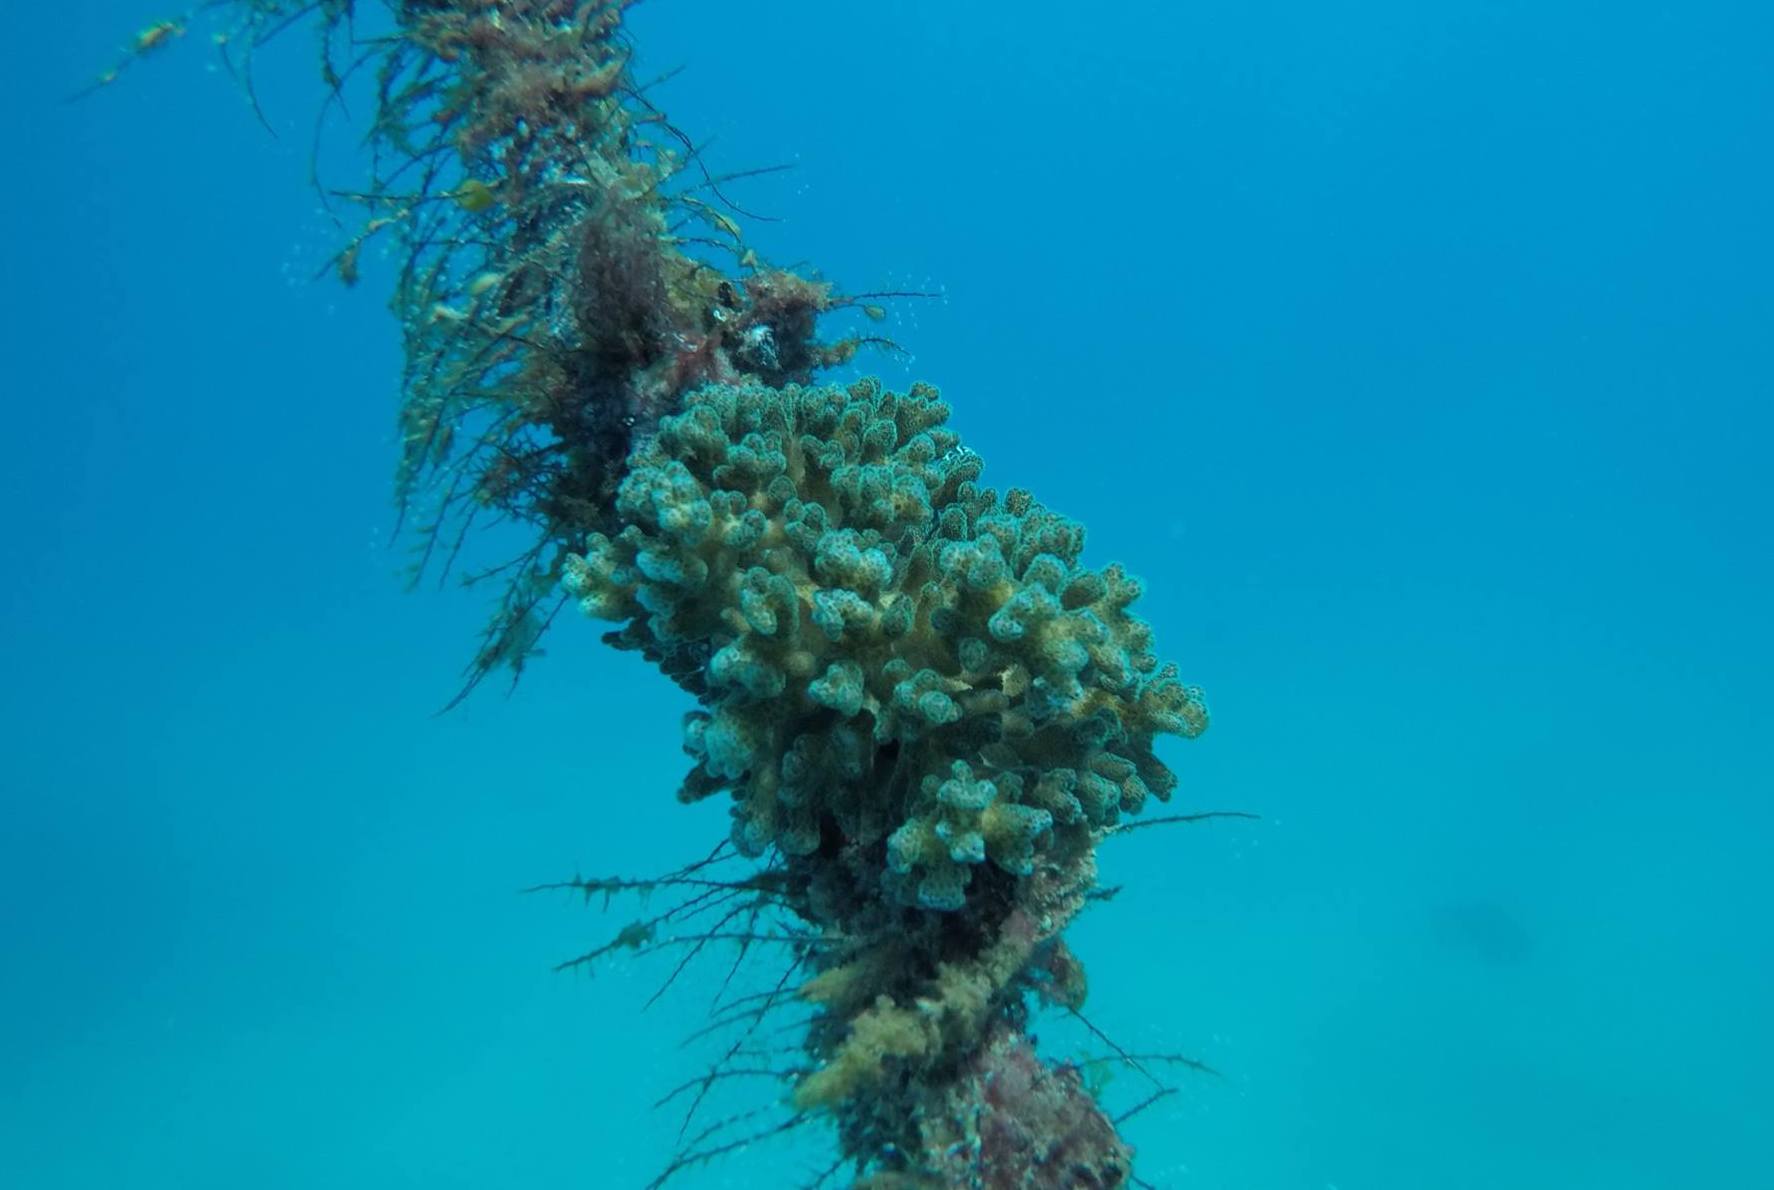 Pocillopora corals are resilient. Pocillopora acuta colony growing on a mooring line near Houbihu harbor in Kenting, Taiwan.